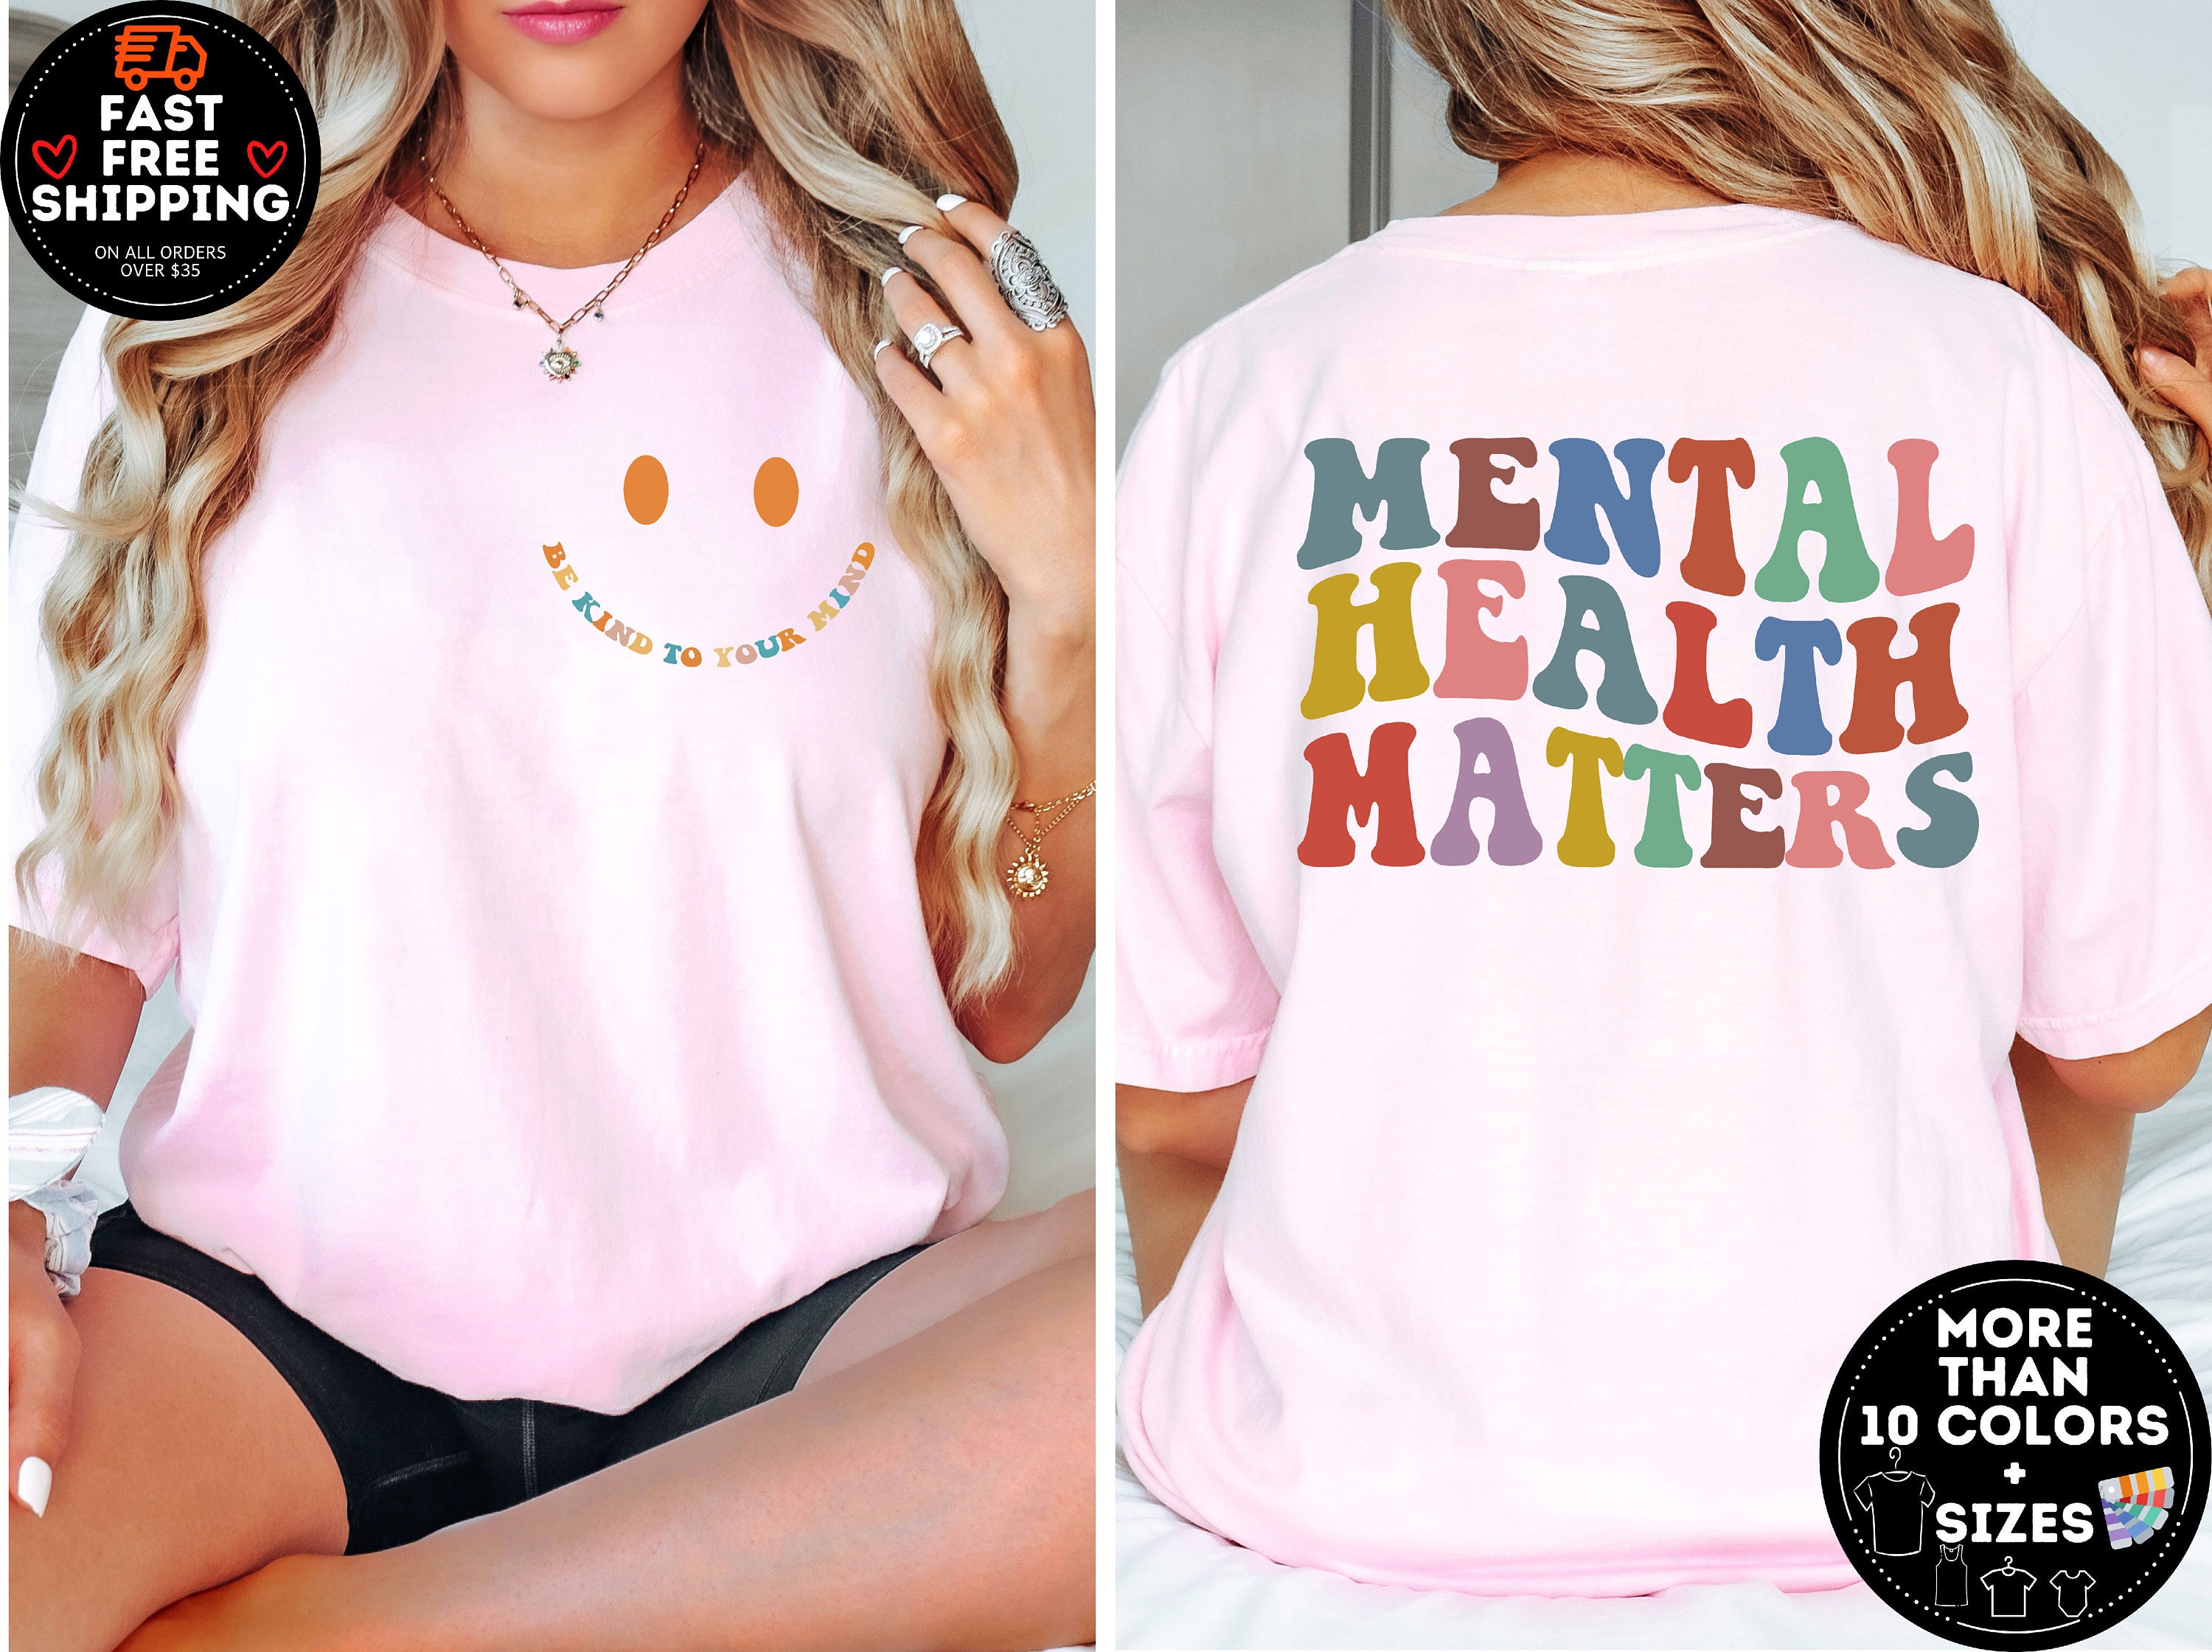 Discover Mental Health Matter Shirt, Be Kind To Your Mind, Positive Quotes, Women Mental Health, Anxiety Shirt, Mental Health Awareness, Psychologist